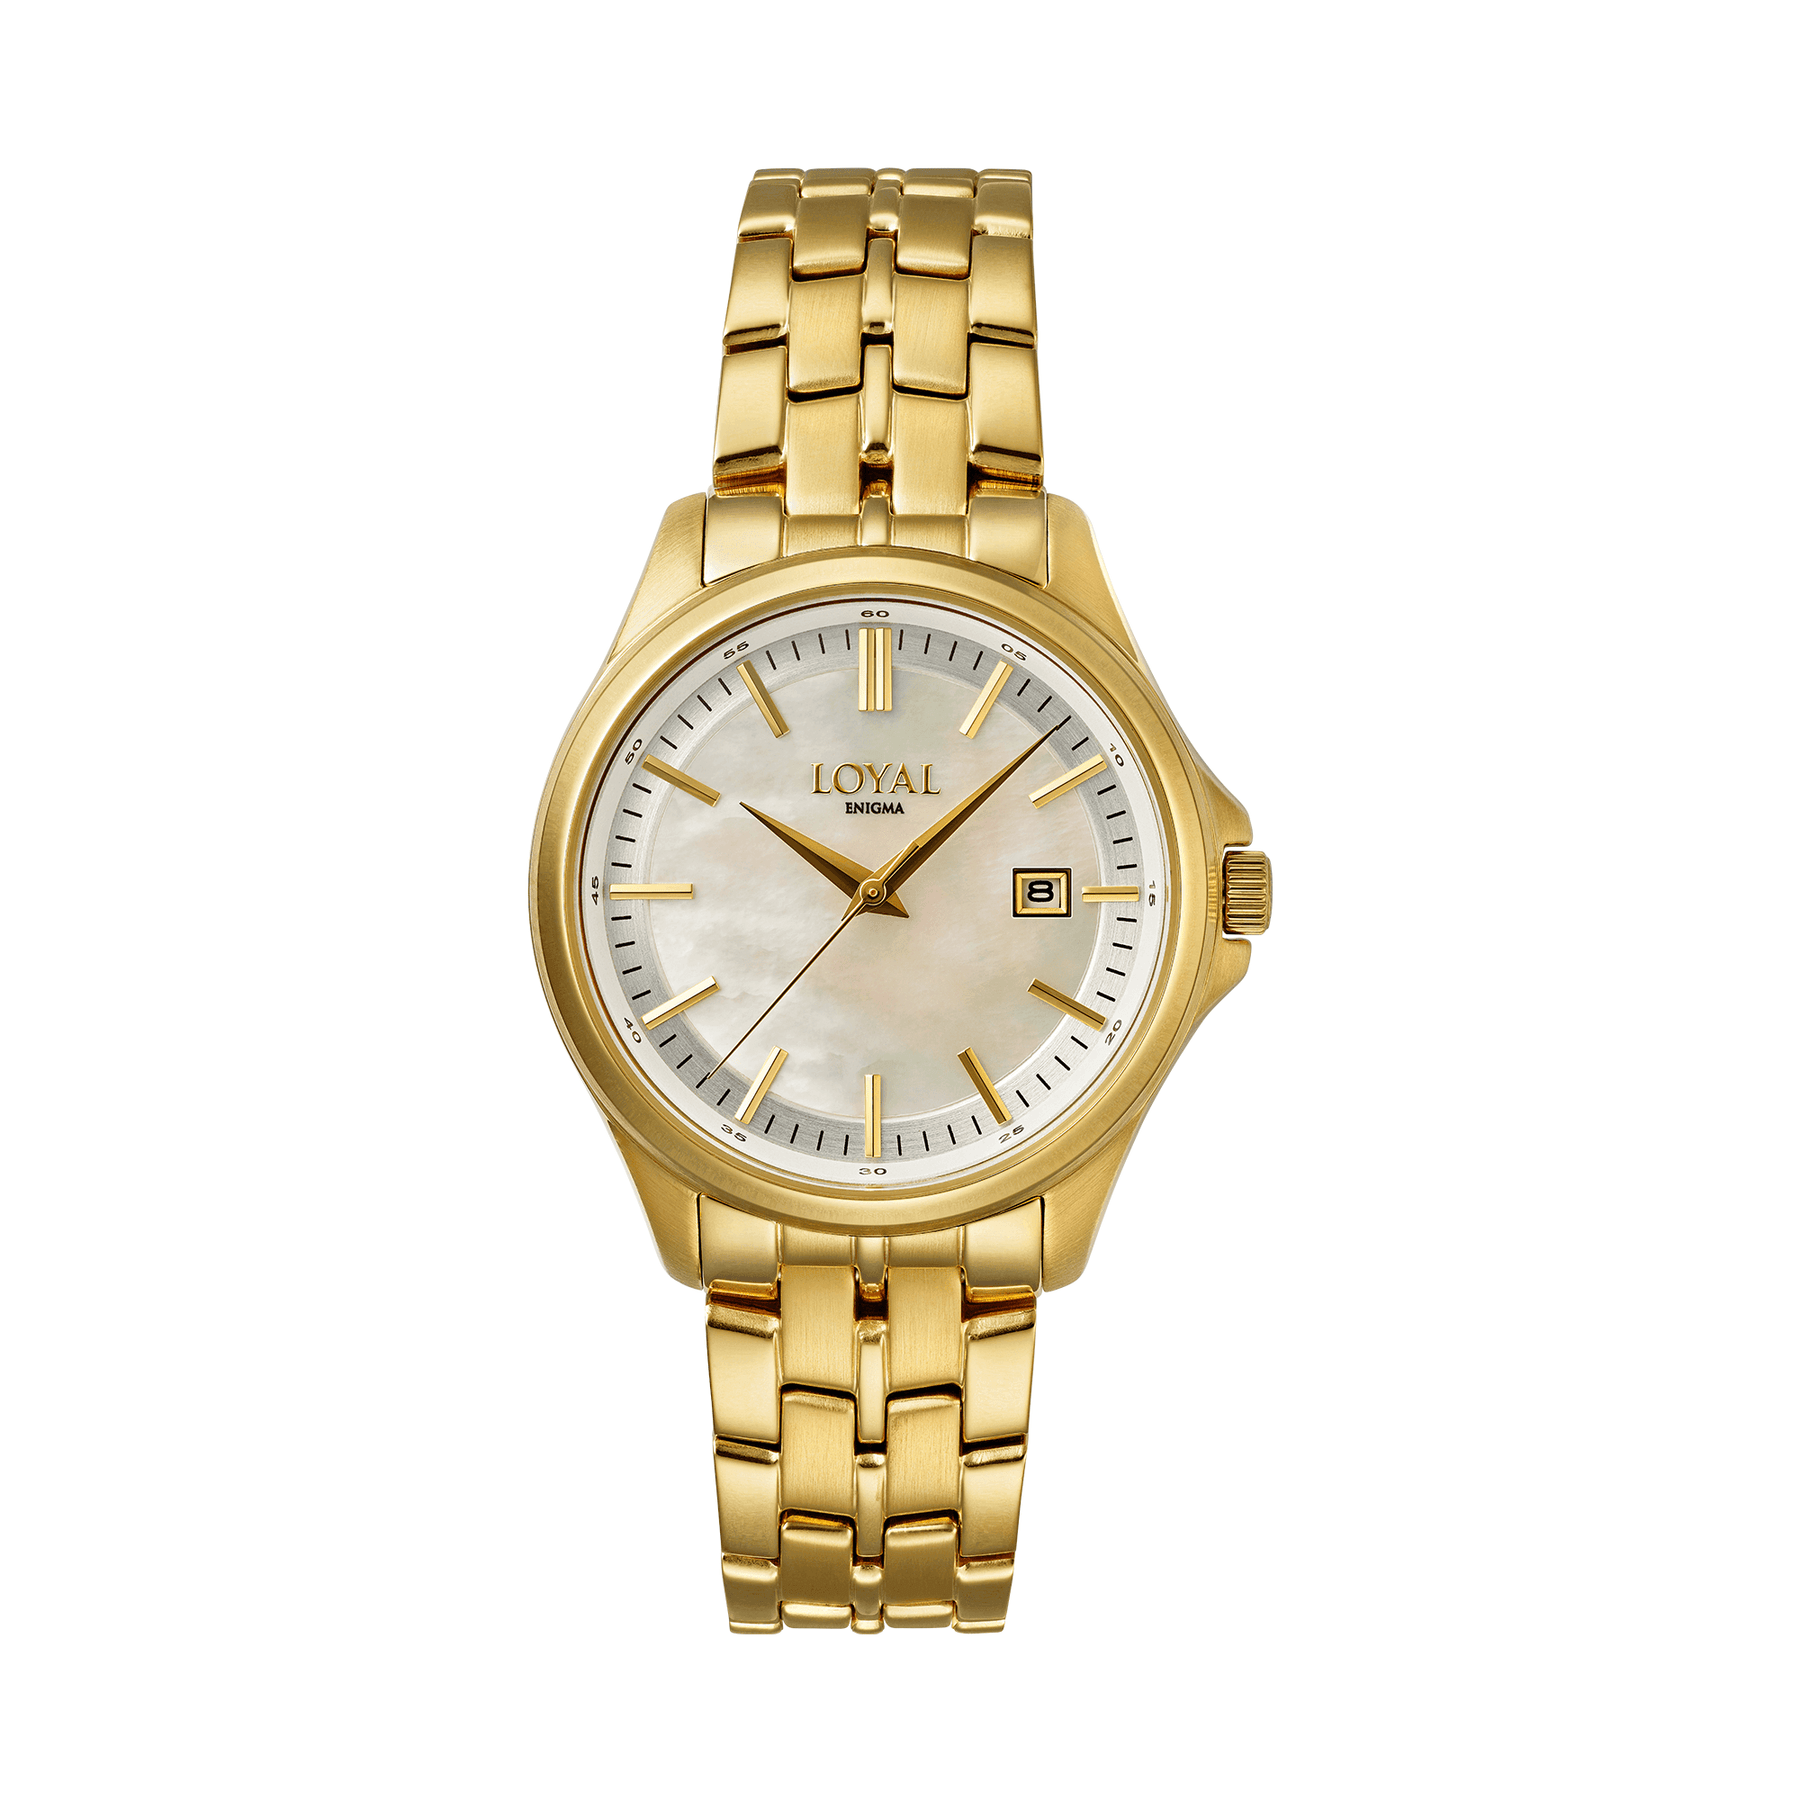 Loyal Women's Enigma Gold Plated Quartz Dress Watch Mother-Of-Pearl Dial - Wallace Bishop